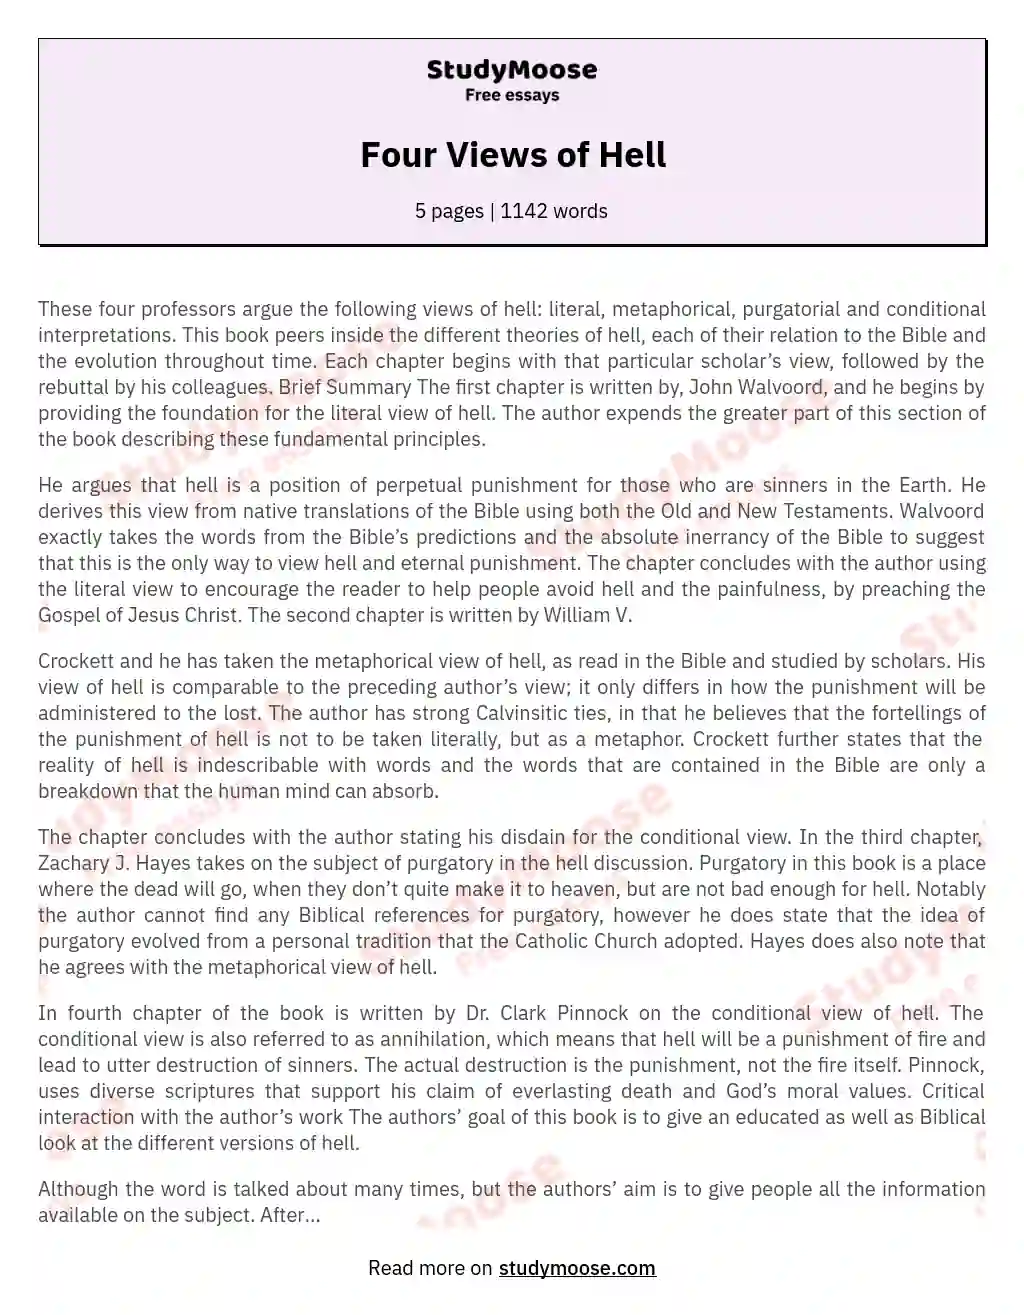 Four Views of Hell essay